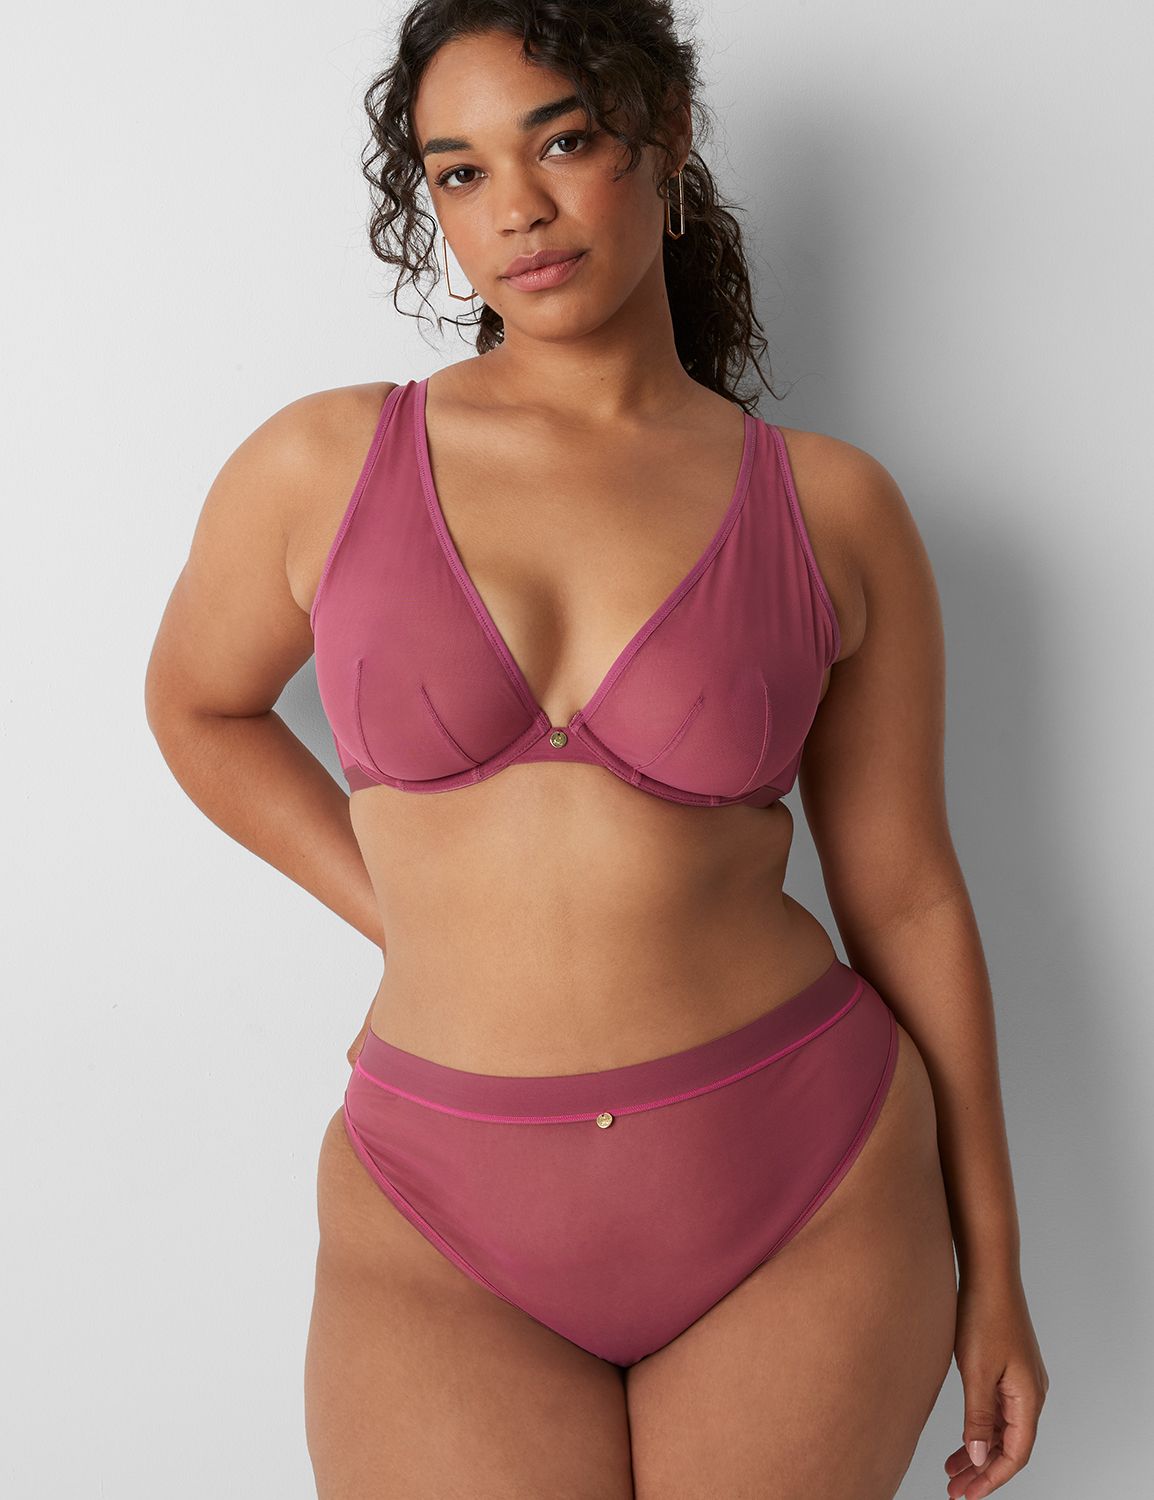 Cacique 5/$25 bra 44DDD Pink Size undefined - $15 - From Natalie